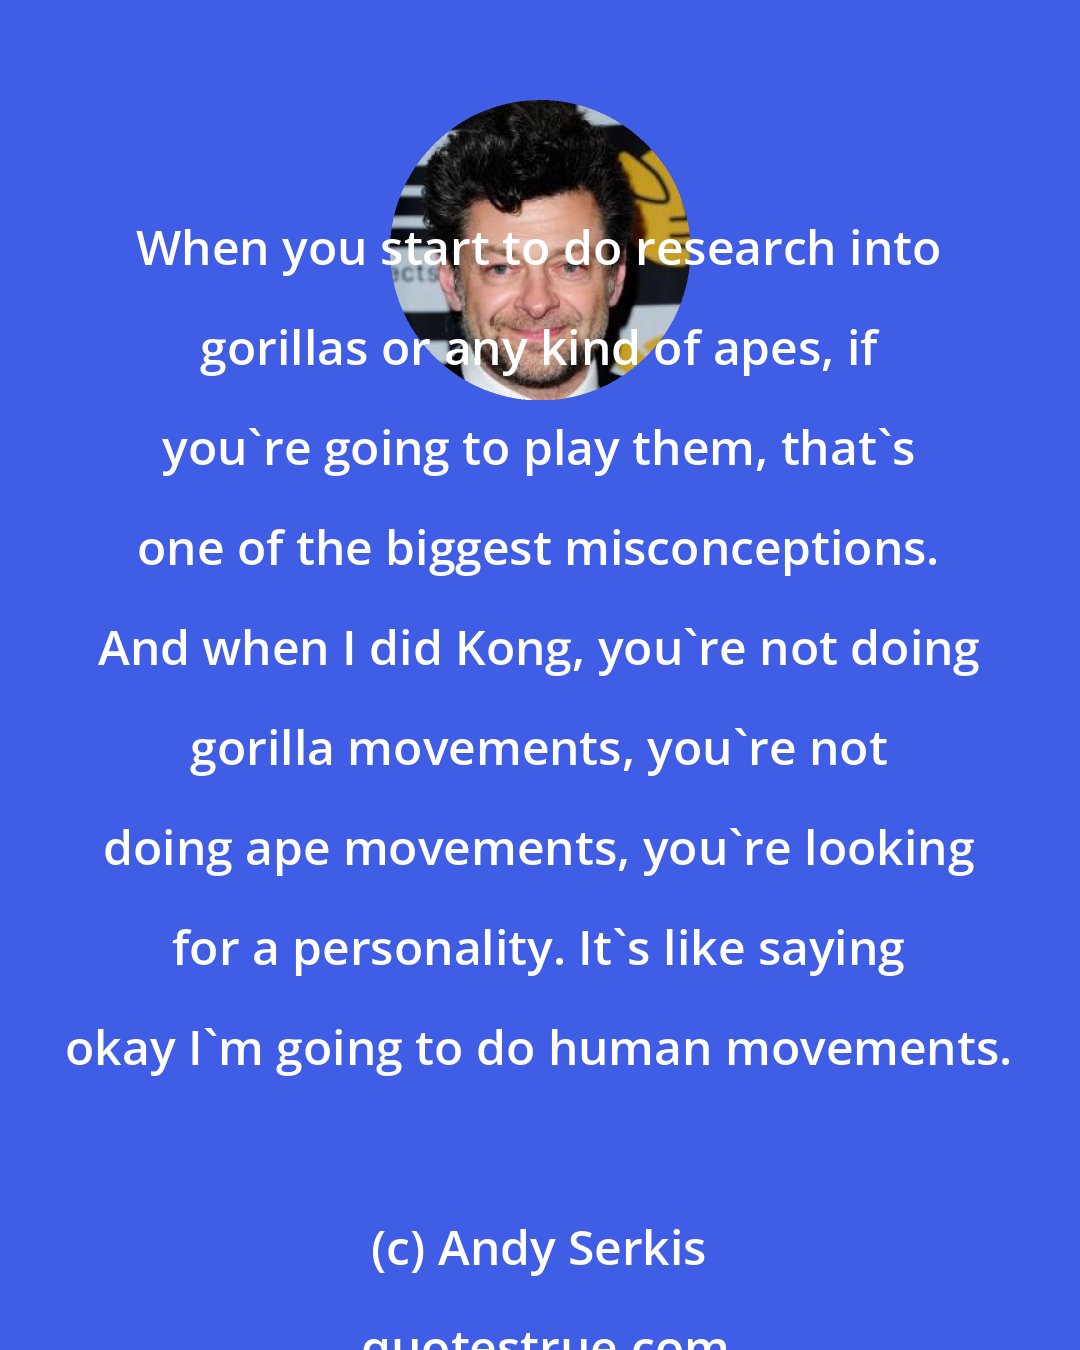 Andy Serkis: When you start to do research into gorillas or any kind of apes, if you're going to play them, that's one of the biggest misconceptions. And when I did Kong, you're not doing gorilla movements, you're not doing ape movements, you're looking for a personality. It's like saying okay I'm going to do human movements.